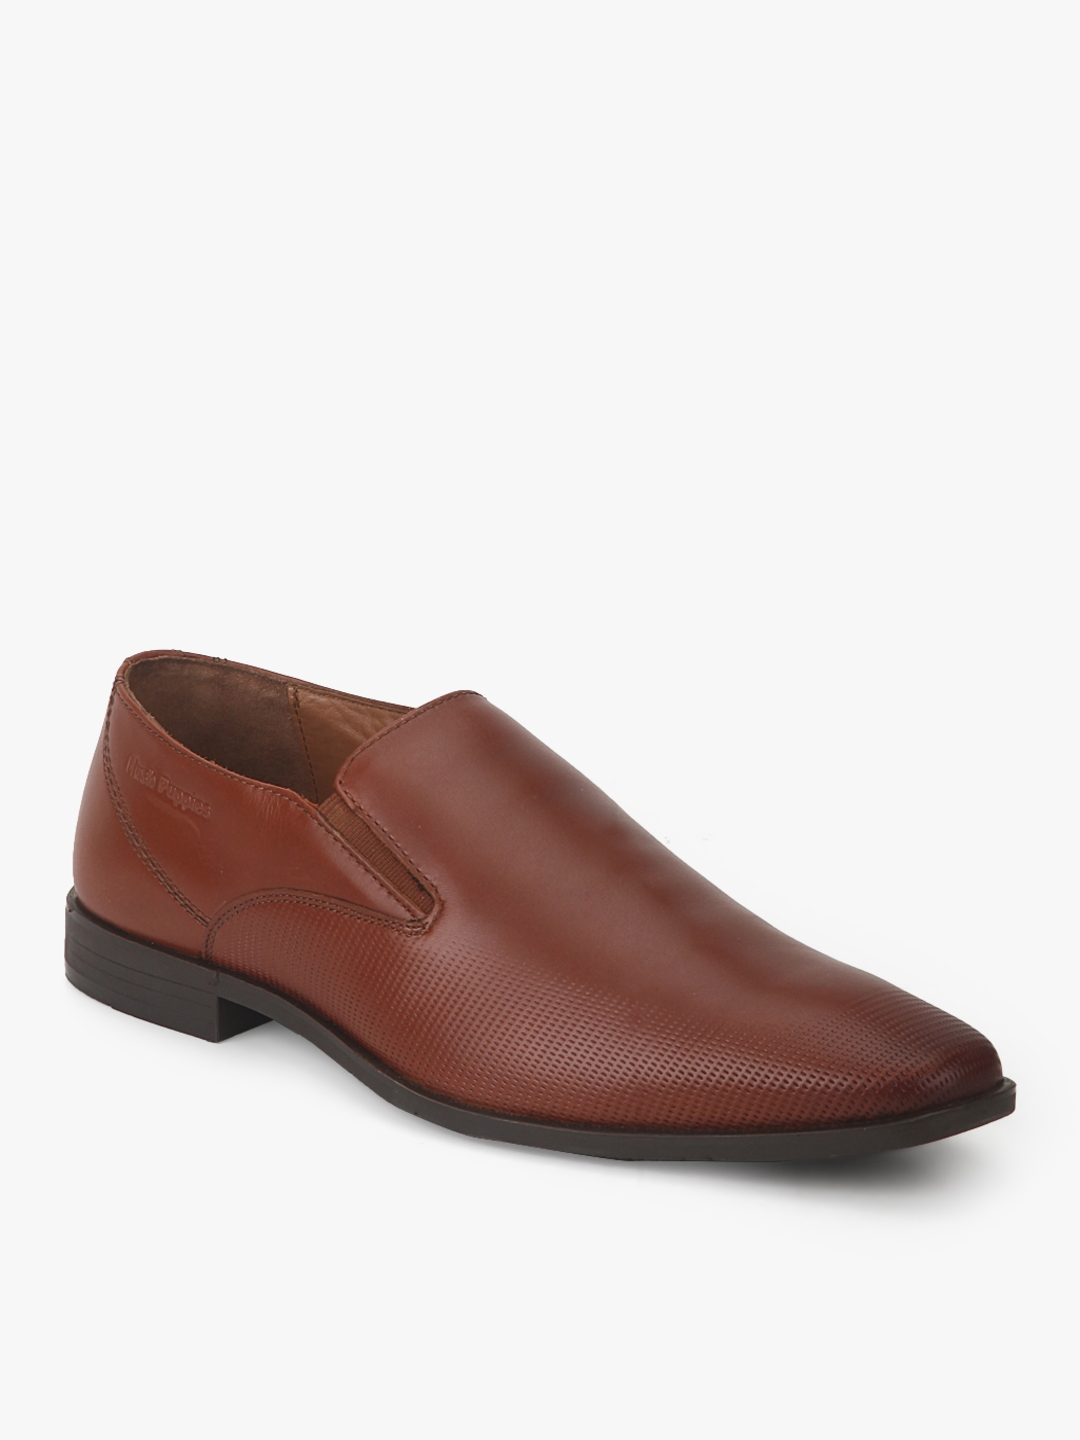 hush puppies formal shoes myntra